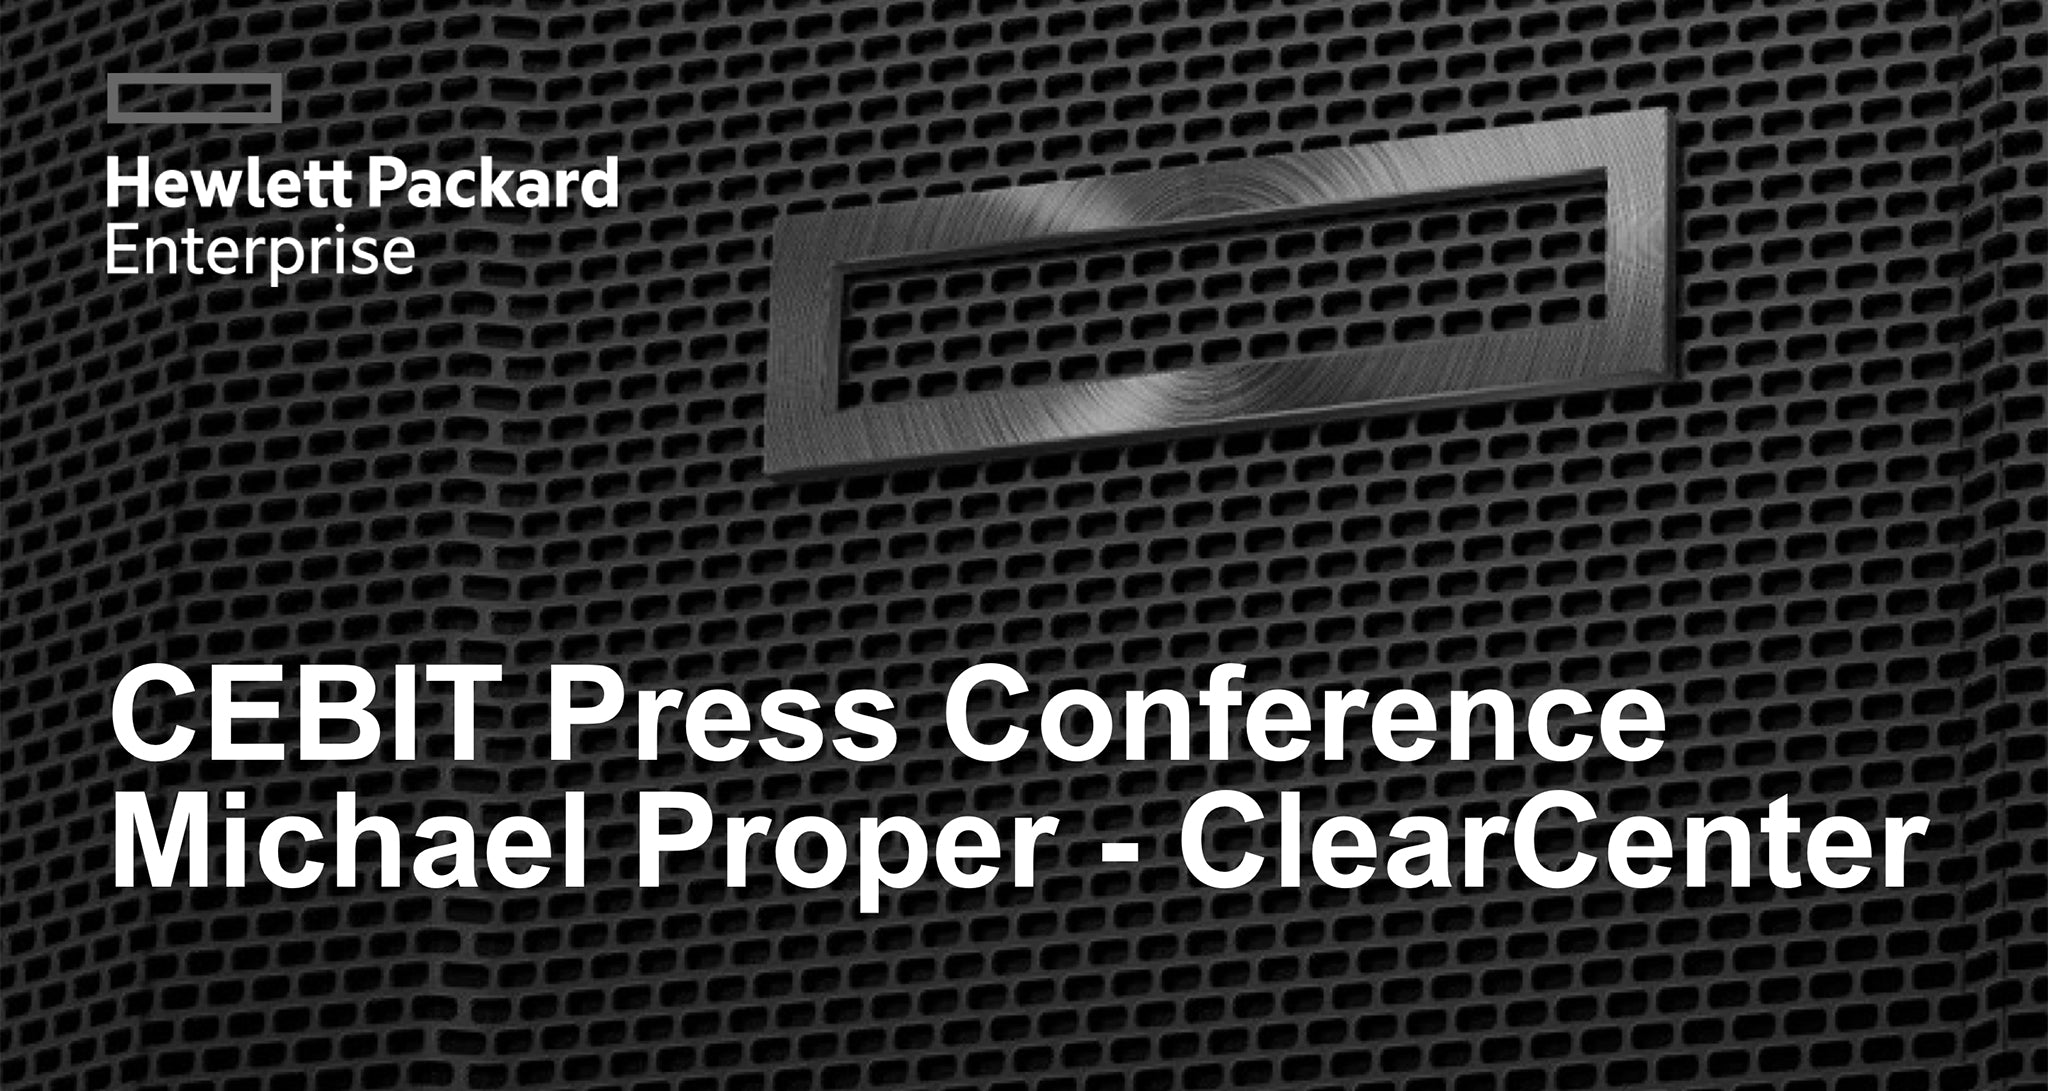 HPE and ClearCenter CEBIT 2018 Press Conference - ClearNODE Q&A